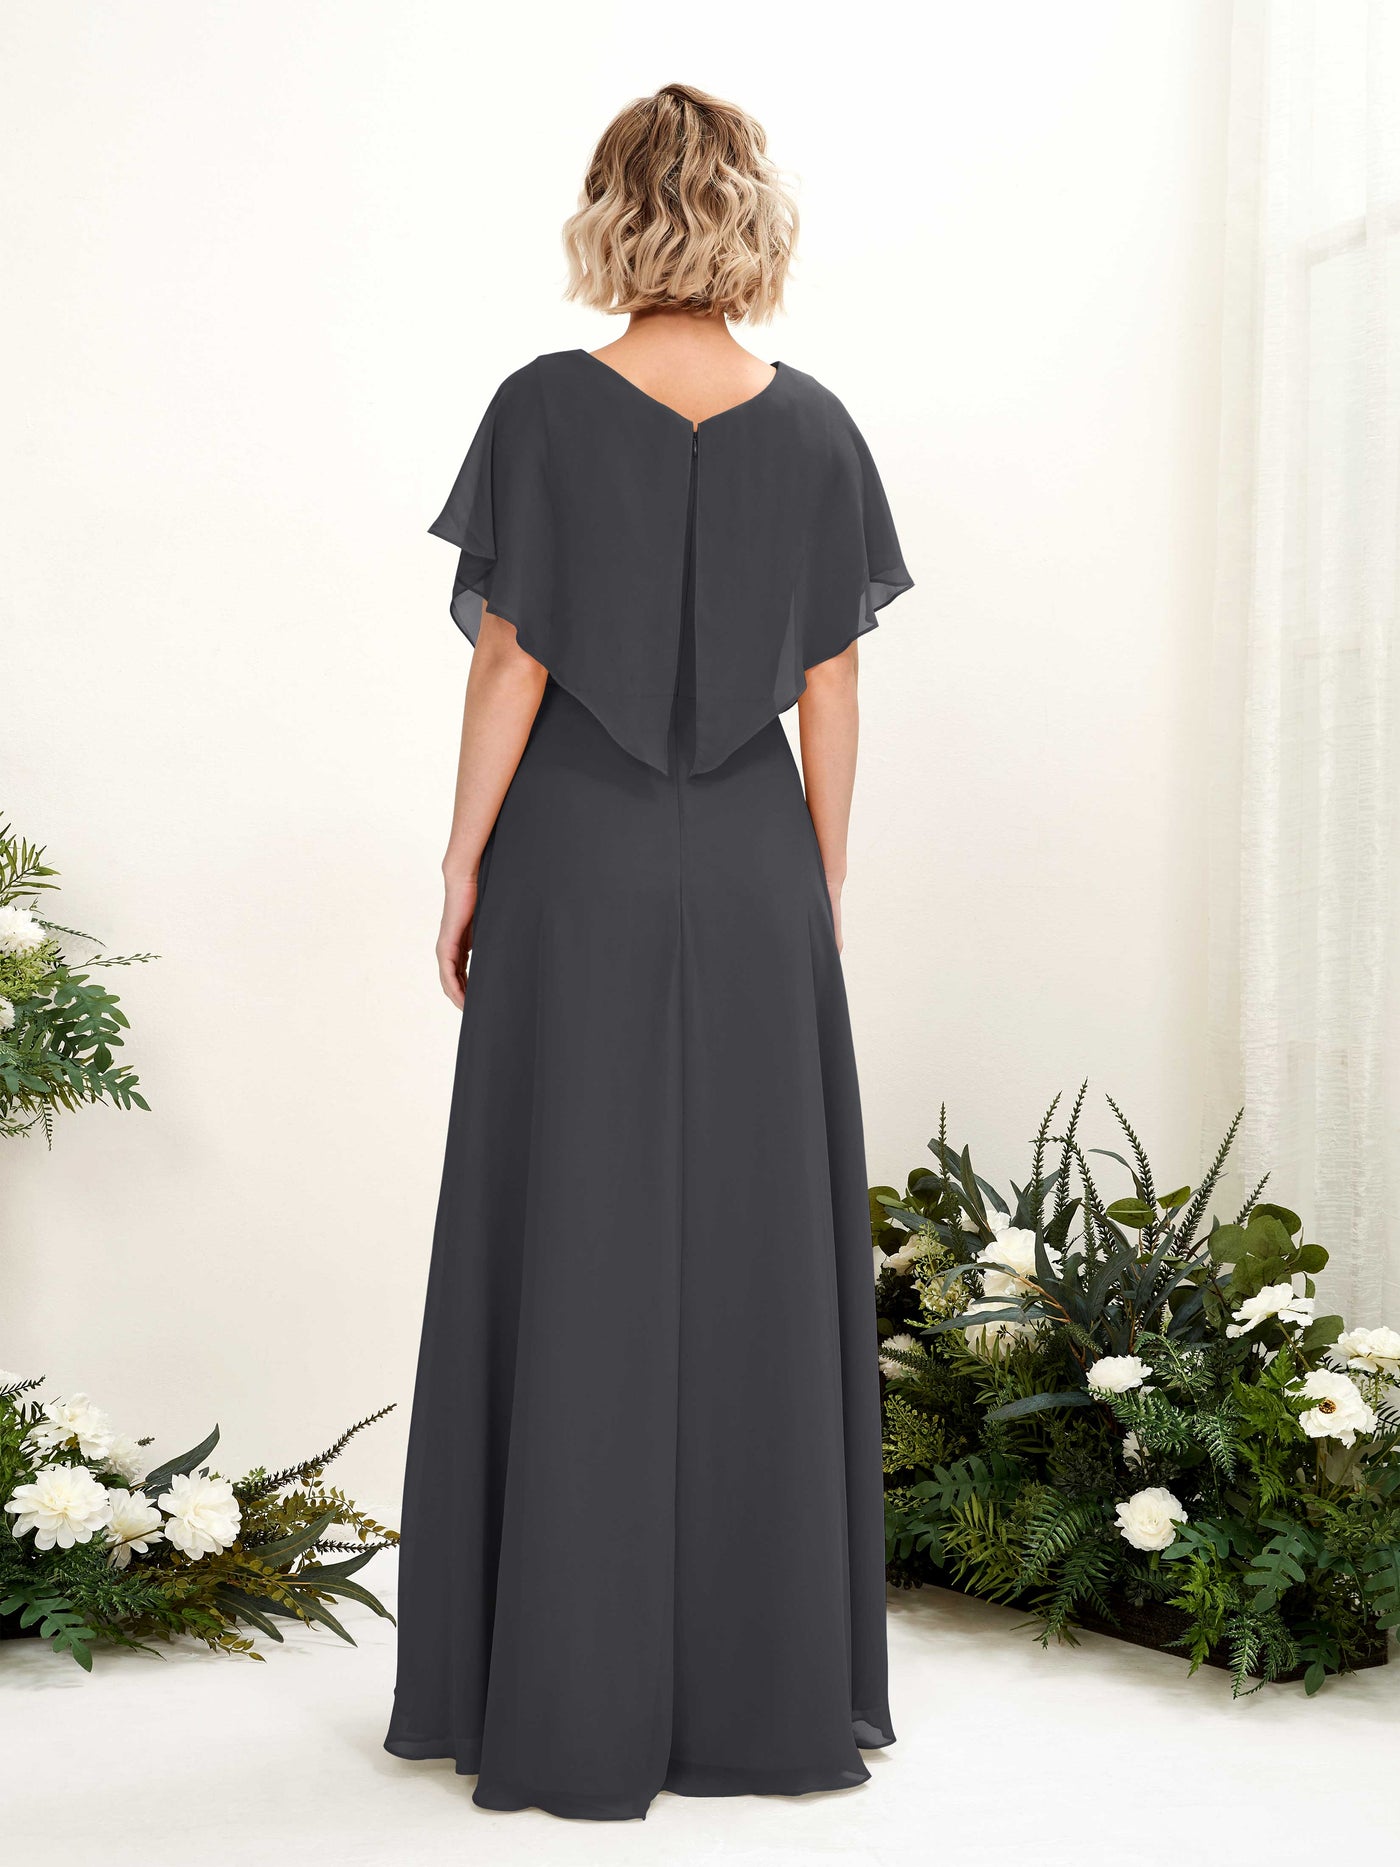 Pewter Bridesmaid Dresses Bridesmaid Dress A-line Chiffon V-neck Full Length Short Sleeves Wedding Party Dress (81222138)#color_pewter